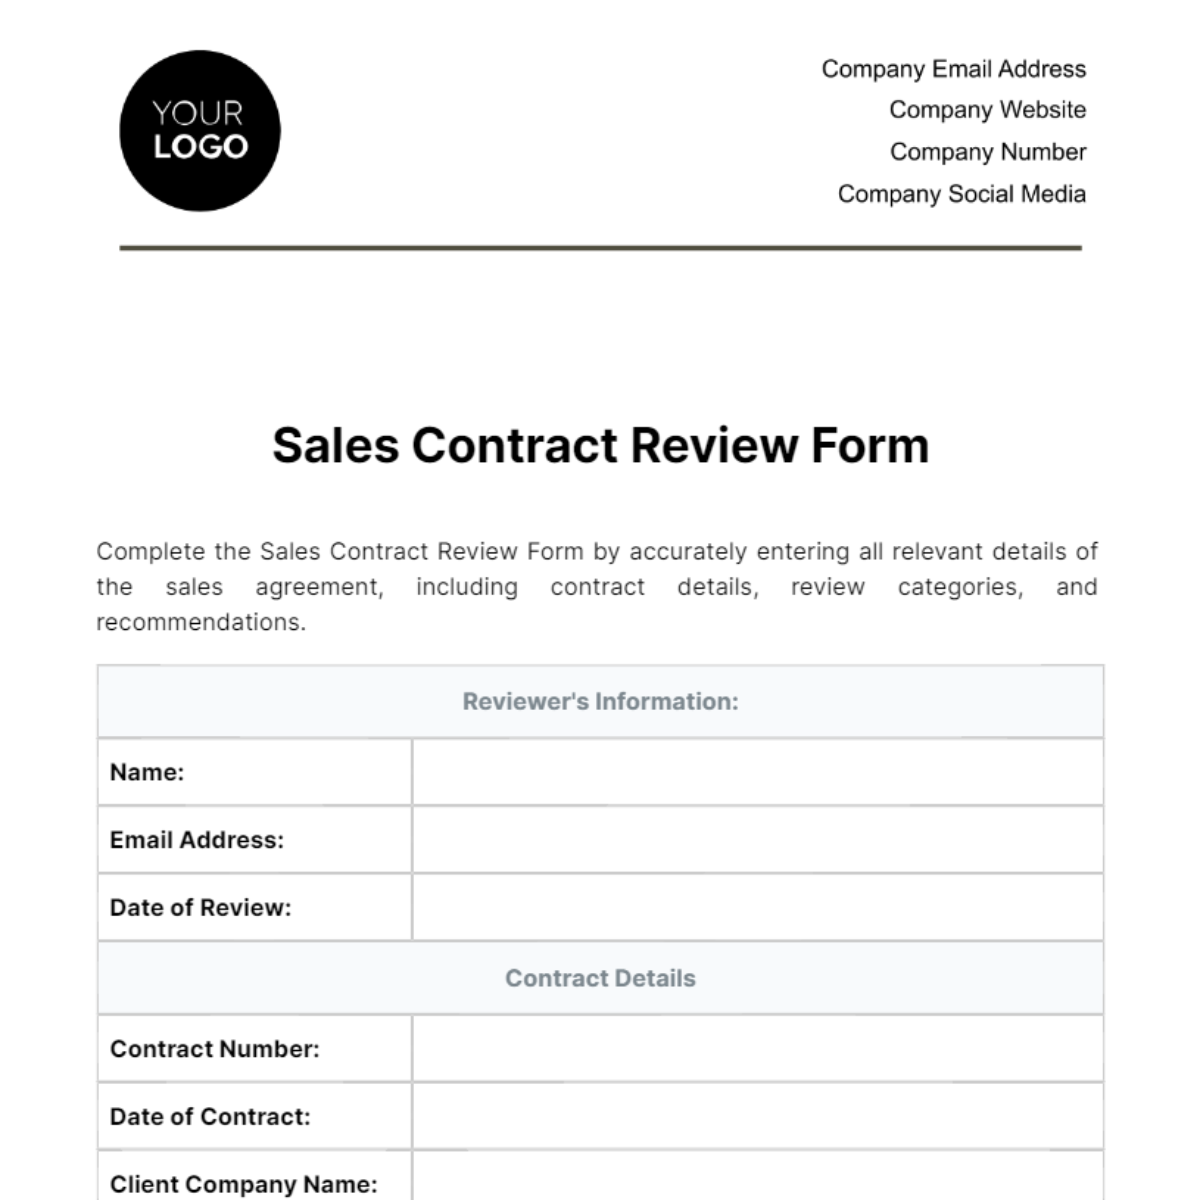 Free Sales Contract Review Form Template